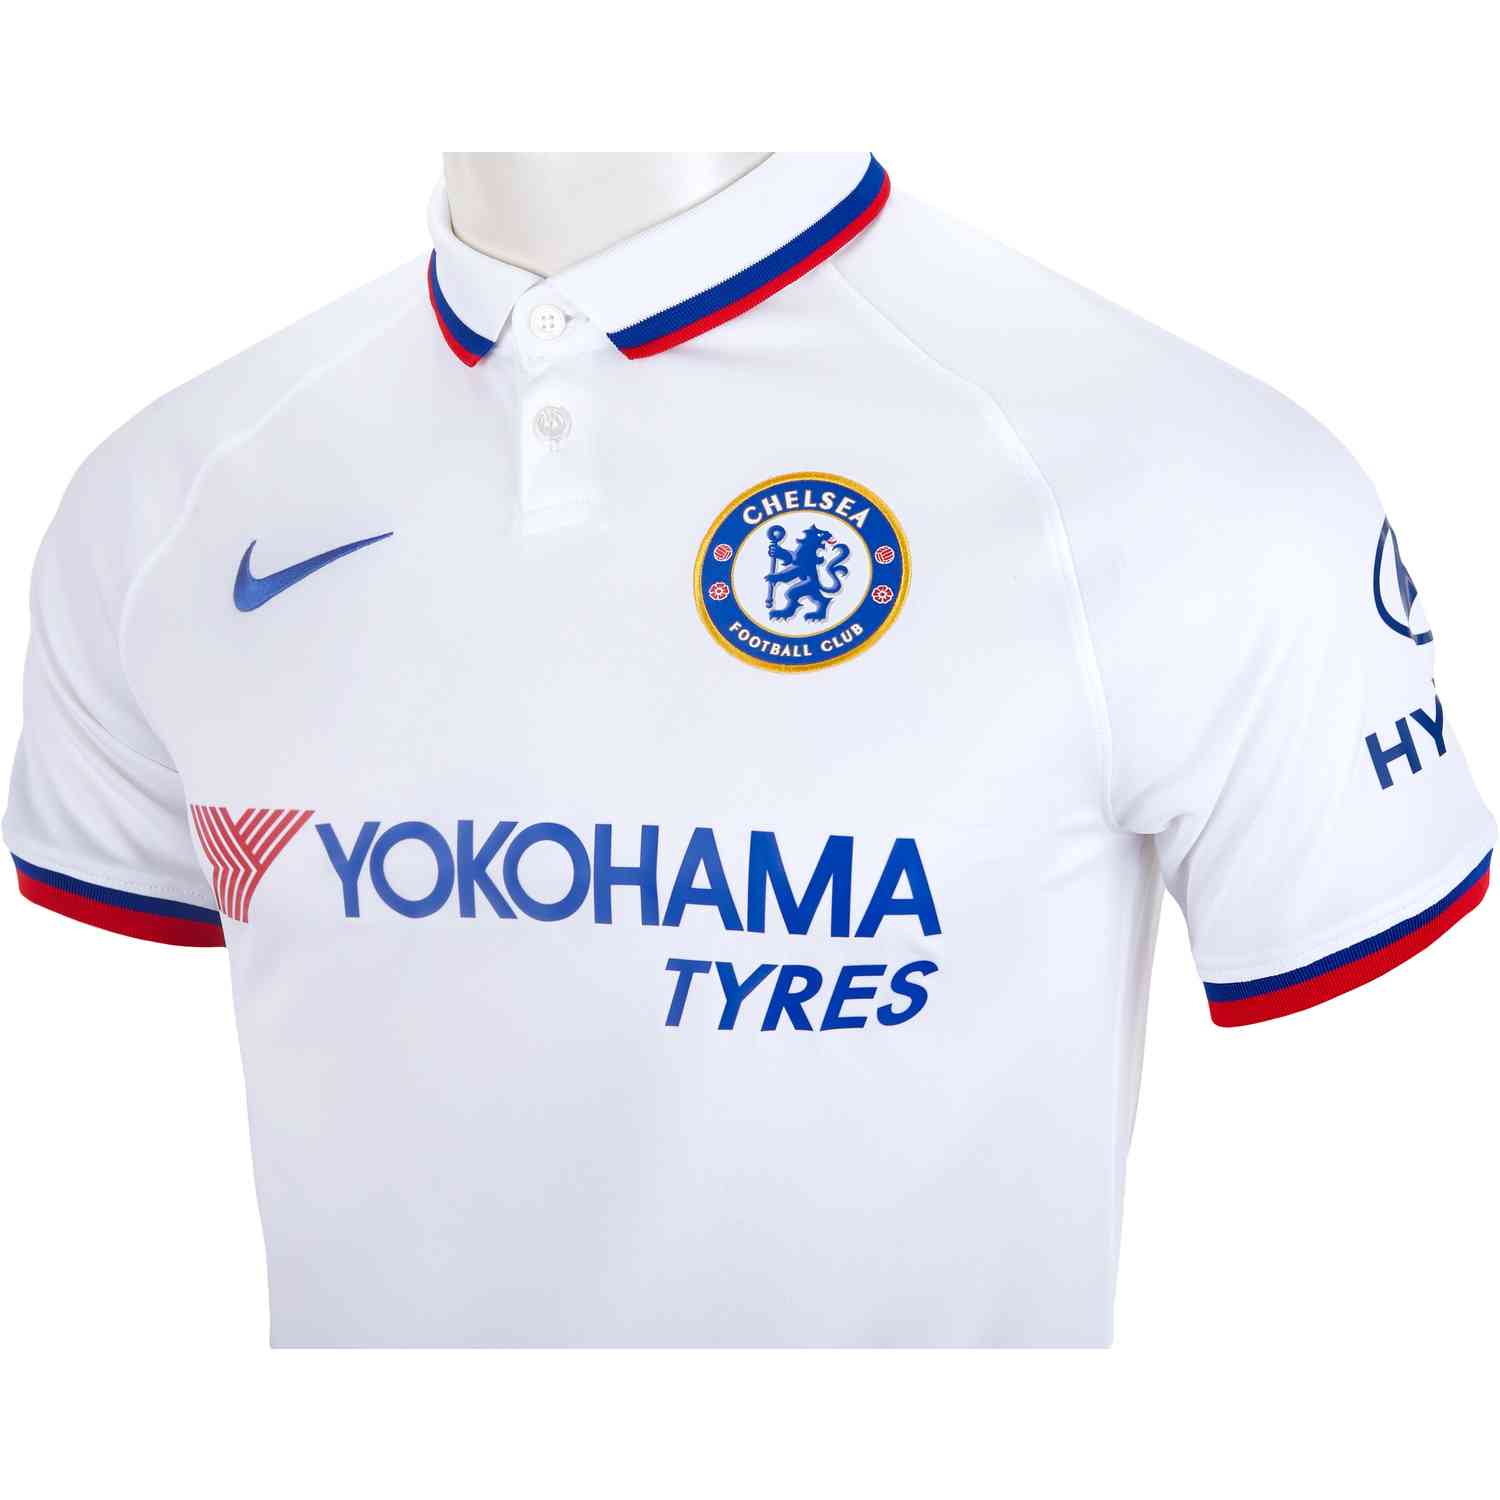 chelsea white jersey 2019